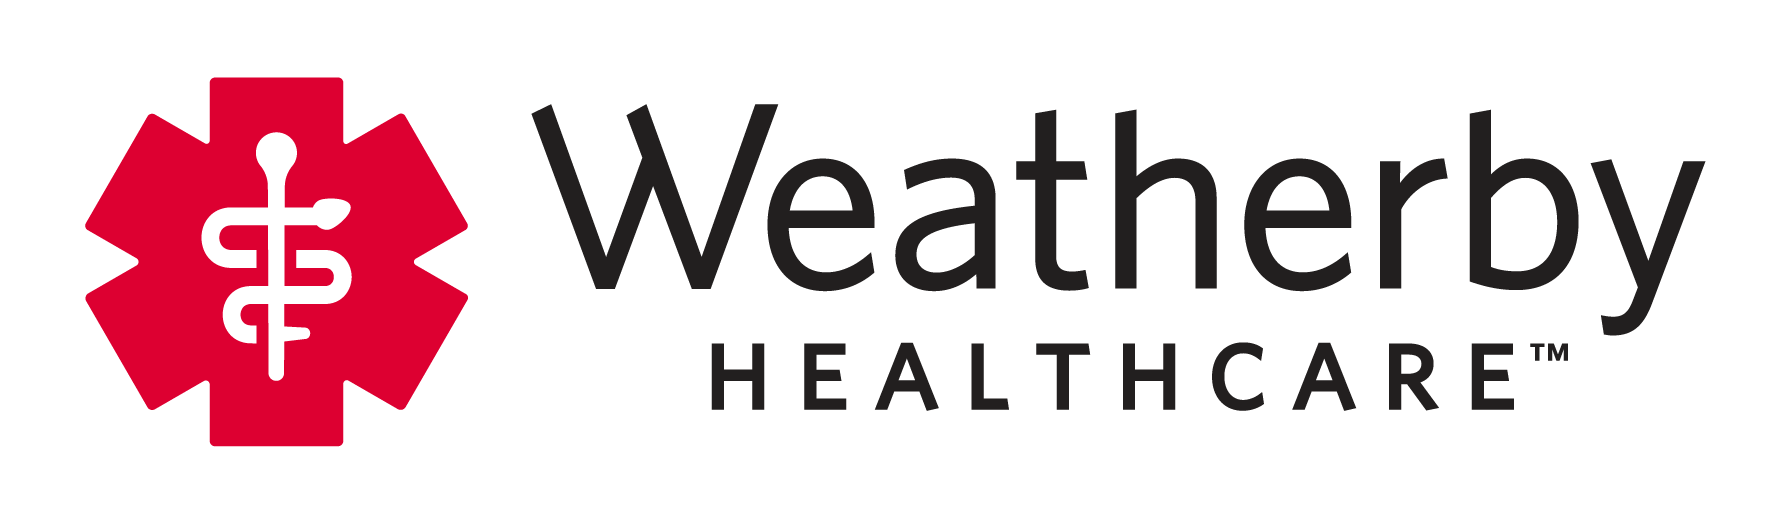 Weatherby Healthcare.png